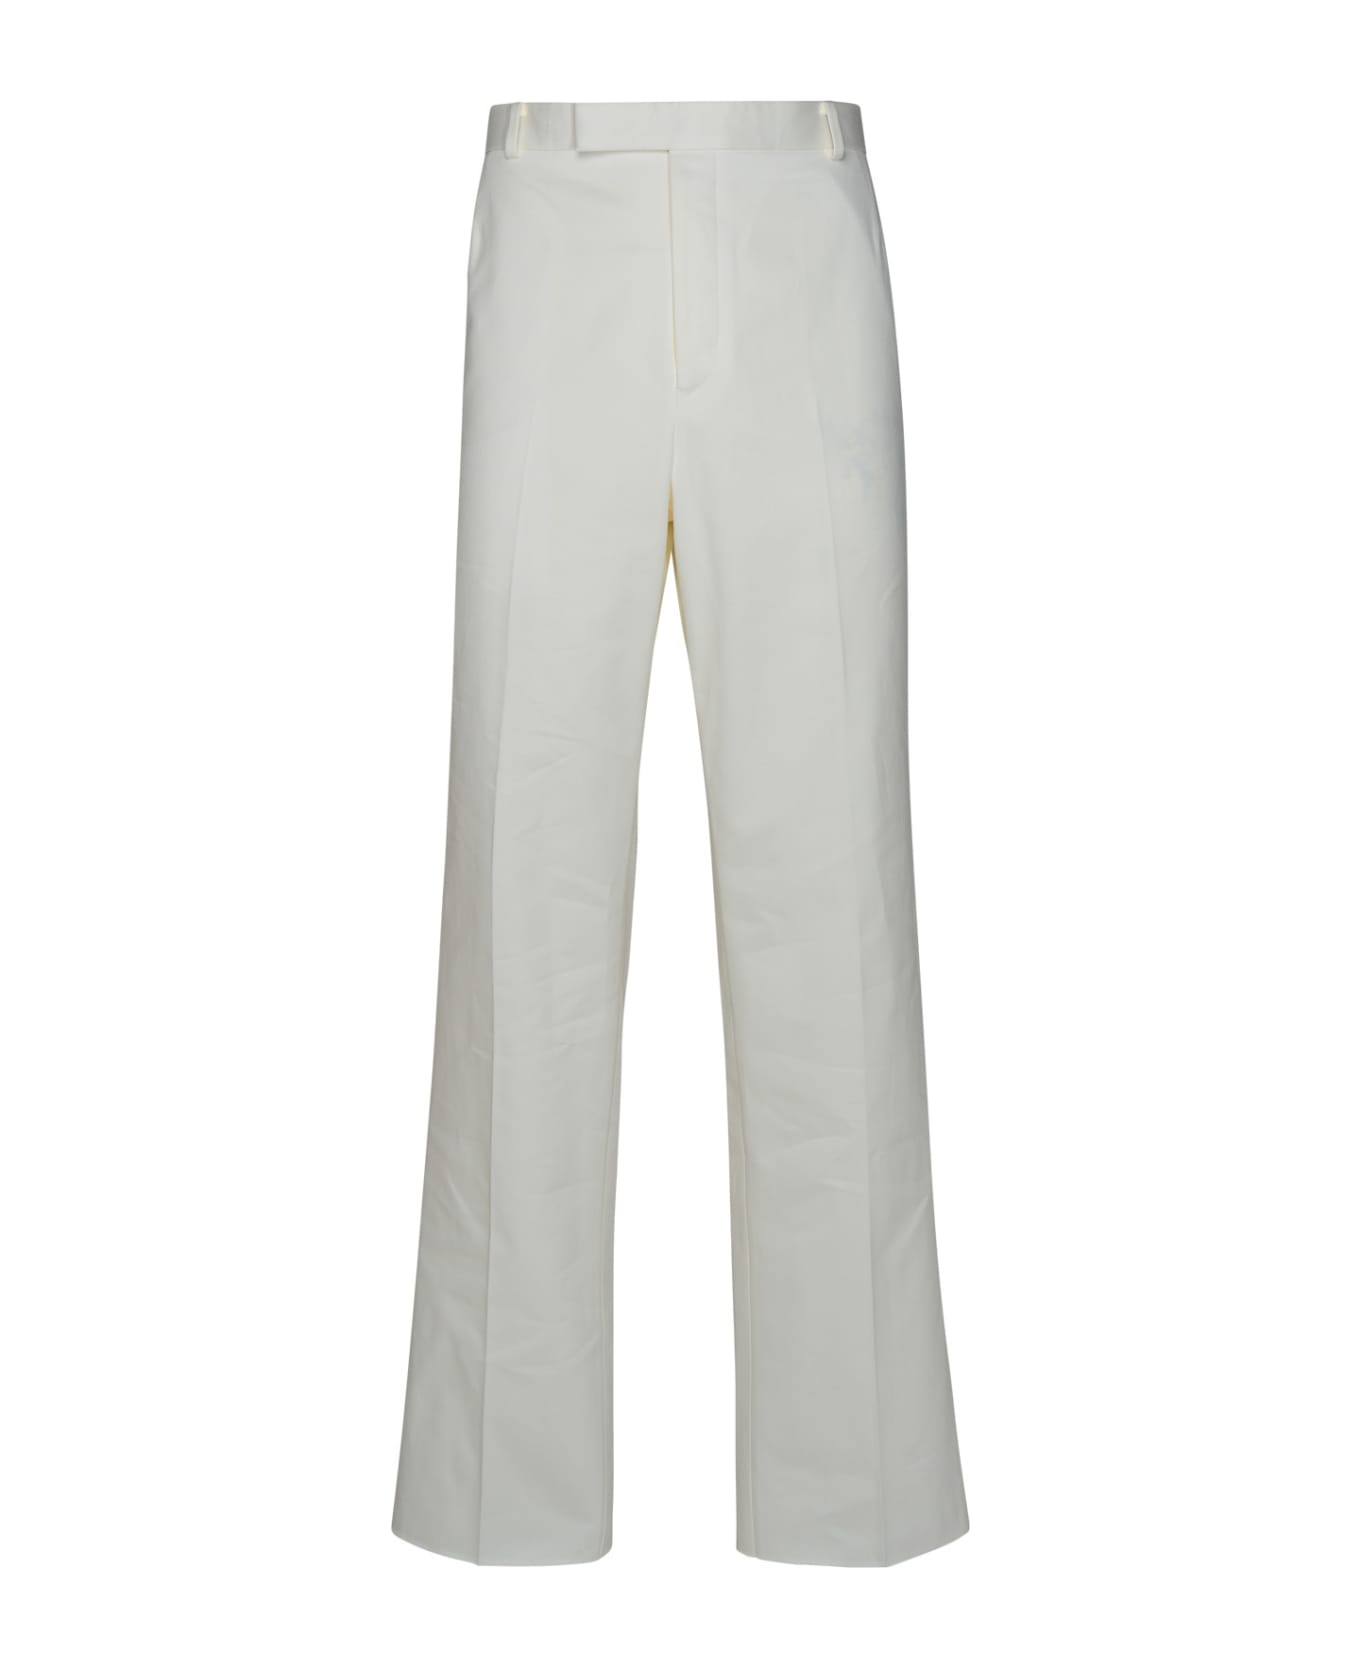 Thom Browne Tailored Trousers In White Cotton - White ボトムス